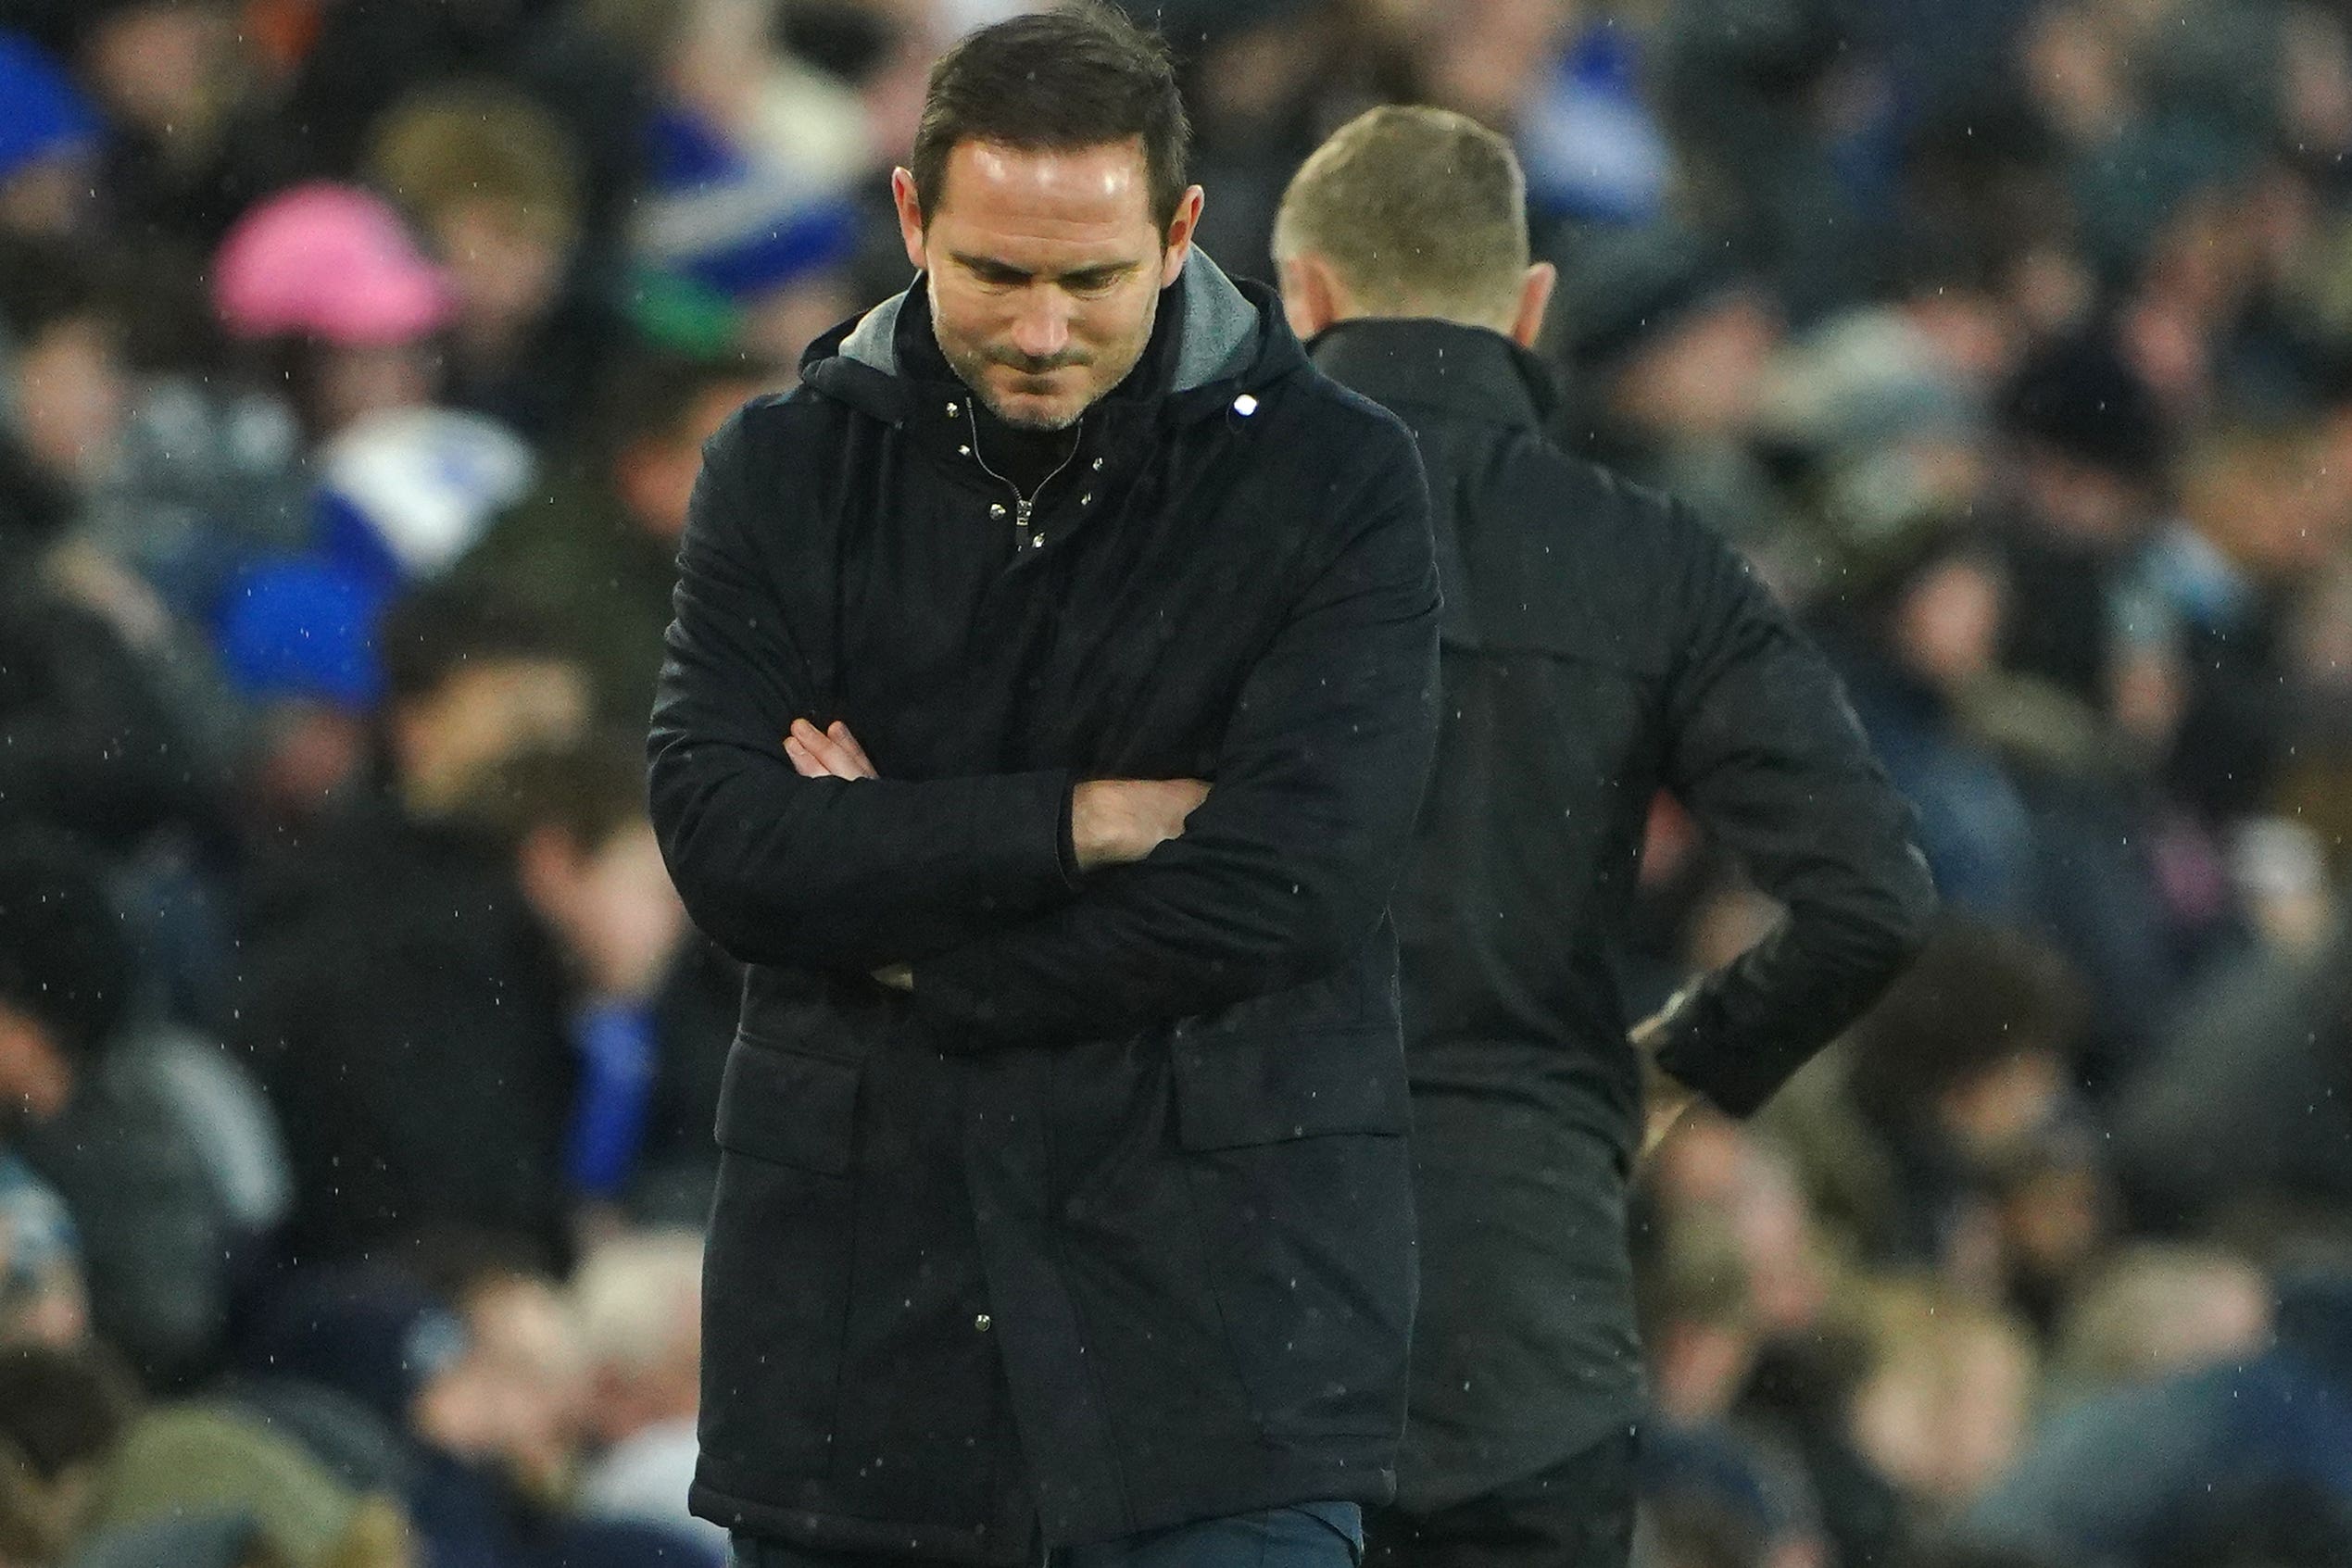 Everton manager Frank Lampard insists he remains confident about his coaching ability as the team’s miserable run continues (Peter Byrne/PA)